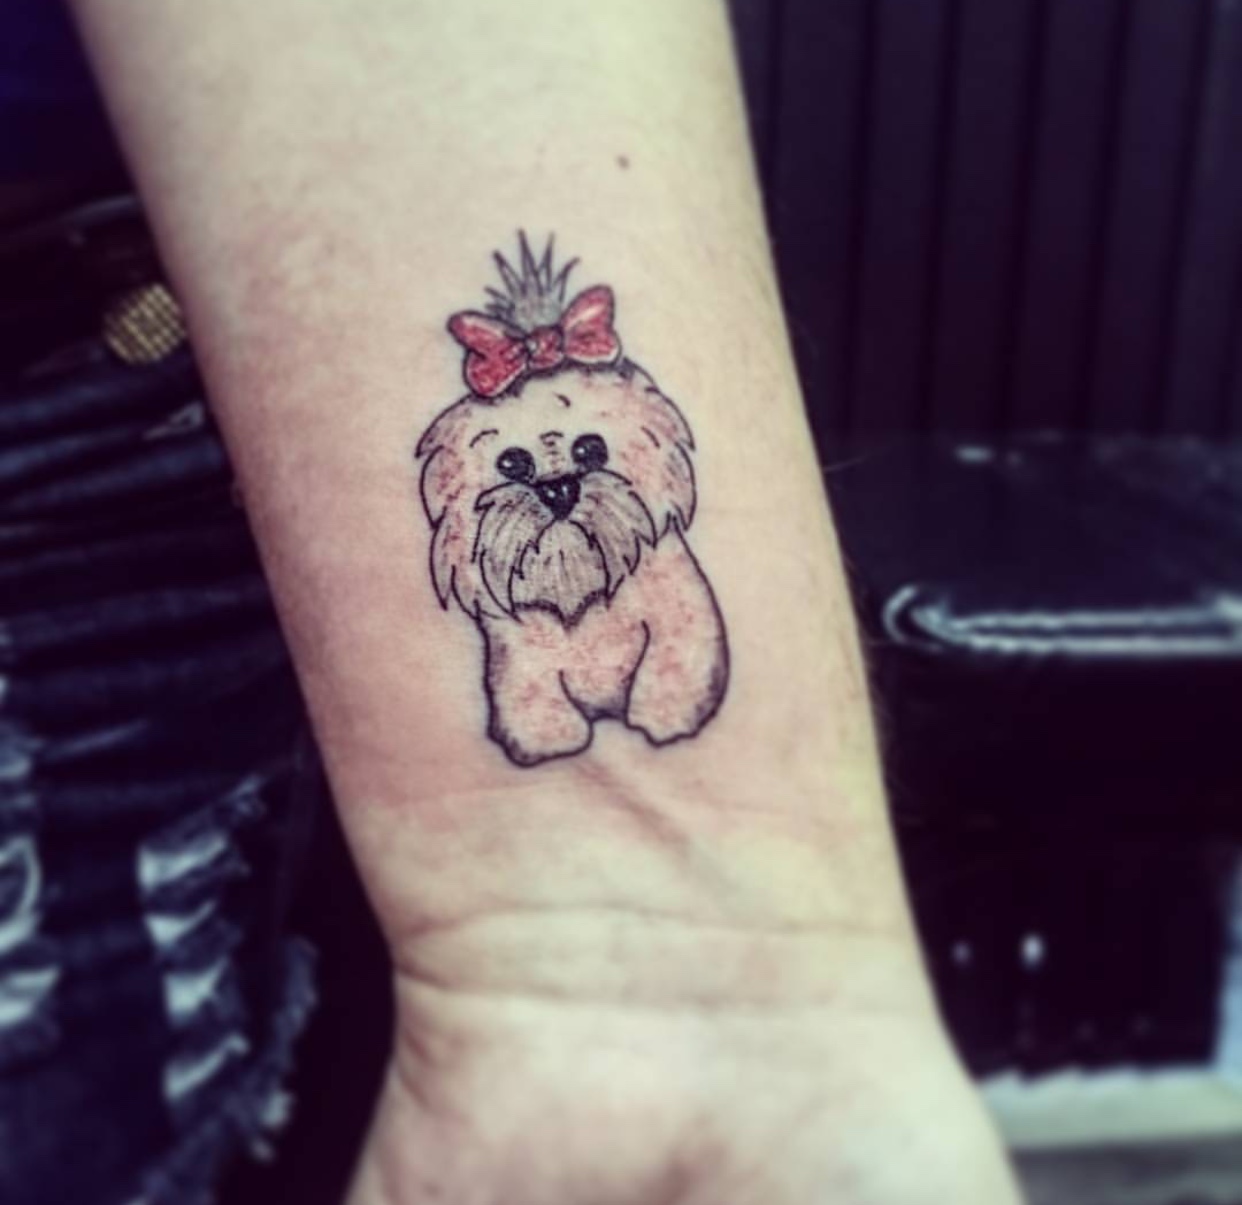 mustached Shih Tzu wearing a ribbon tie on top of its head tattoo on the wrist